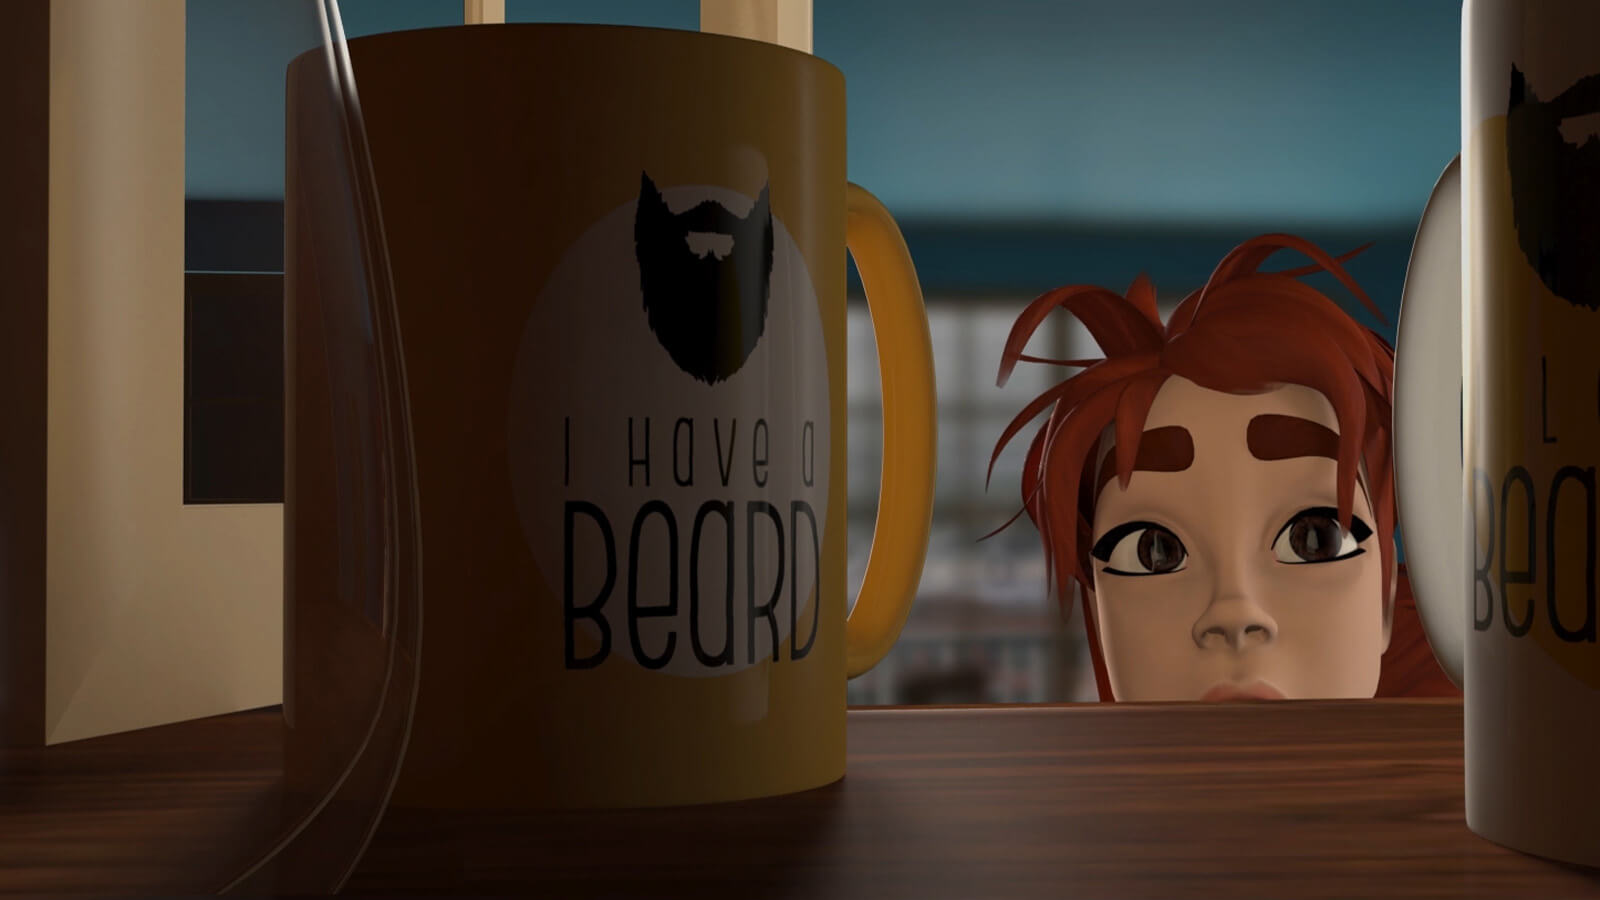 A woman reaches into a cupboard for her coffee mug that says &#039;I have a beard.&#039;